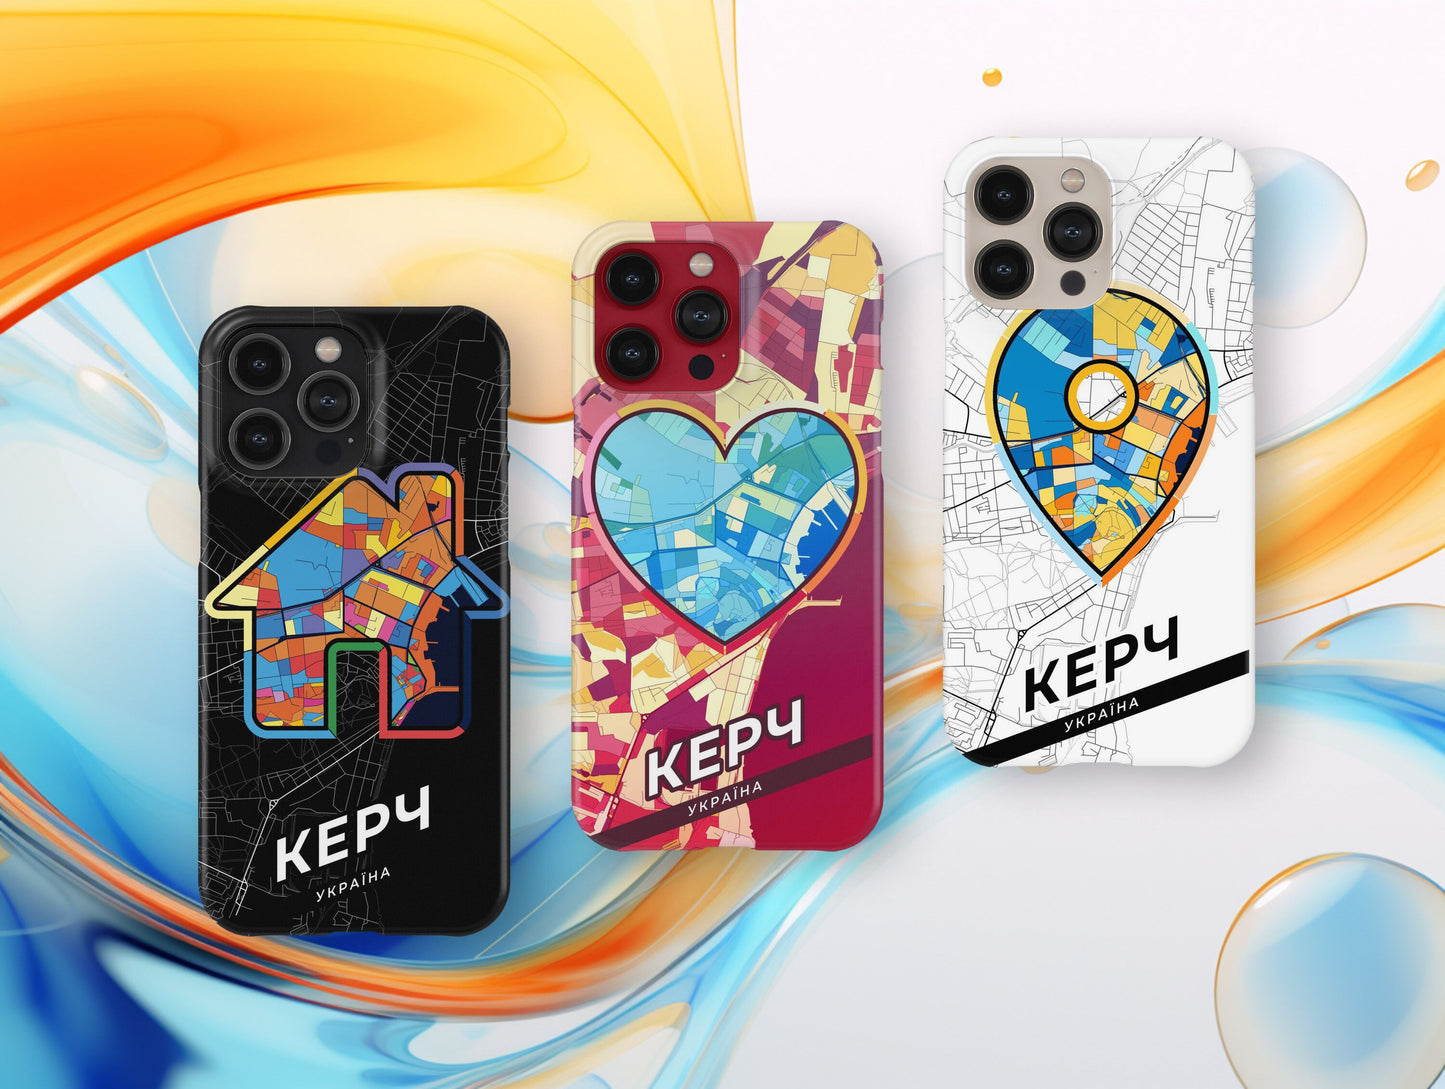 Kerch Ukraine slim phone case with colorful icon. Birthday, wedding or housewarming gift. Couple match cases.